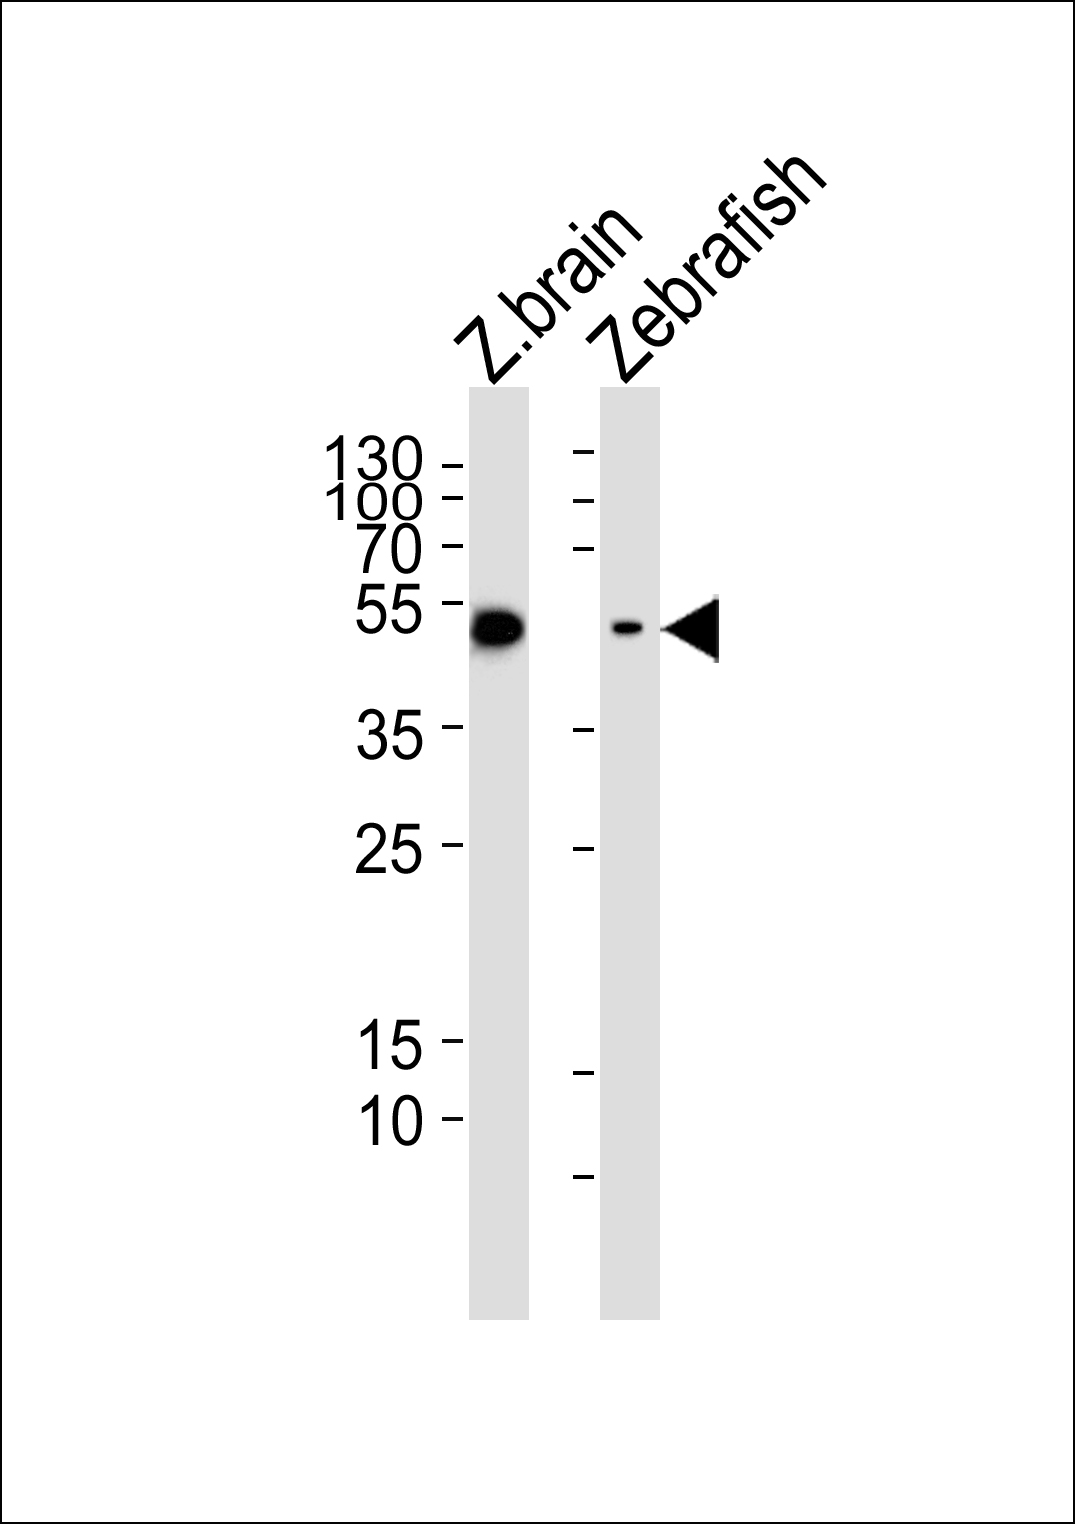 Western blot analysis of lysates from zebrafish brain,  Zebrafish tissue lysate (from left to right),  using (DANRE) gfap Antibody (N-term)(Cat.   #AP20618a).   AP20618a was diluted at 1:1000 at each lane.   A goat anti-rabbit IgG H&L(HRP) at 1:5000 dilution was used as the secondary antibody.  Lysates at 35ug per lane.